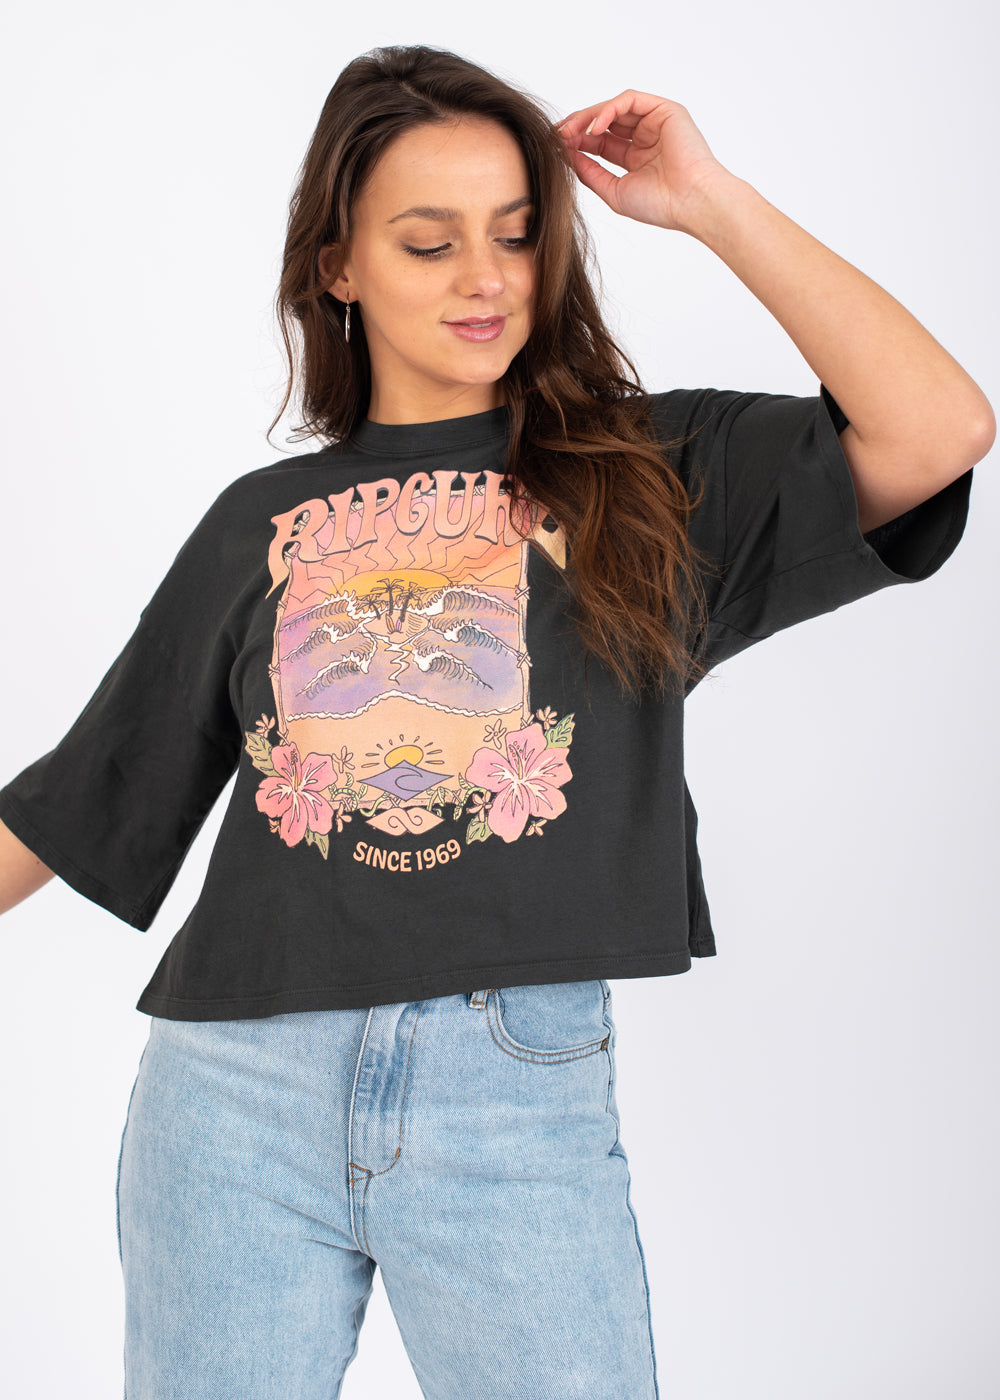 Tee The Crop by shop Heritage Beach – Rip | ocean Curl Barrelled lovers Boutique for A